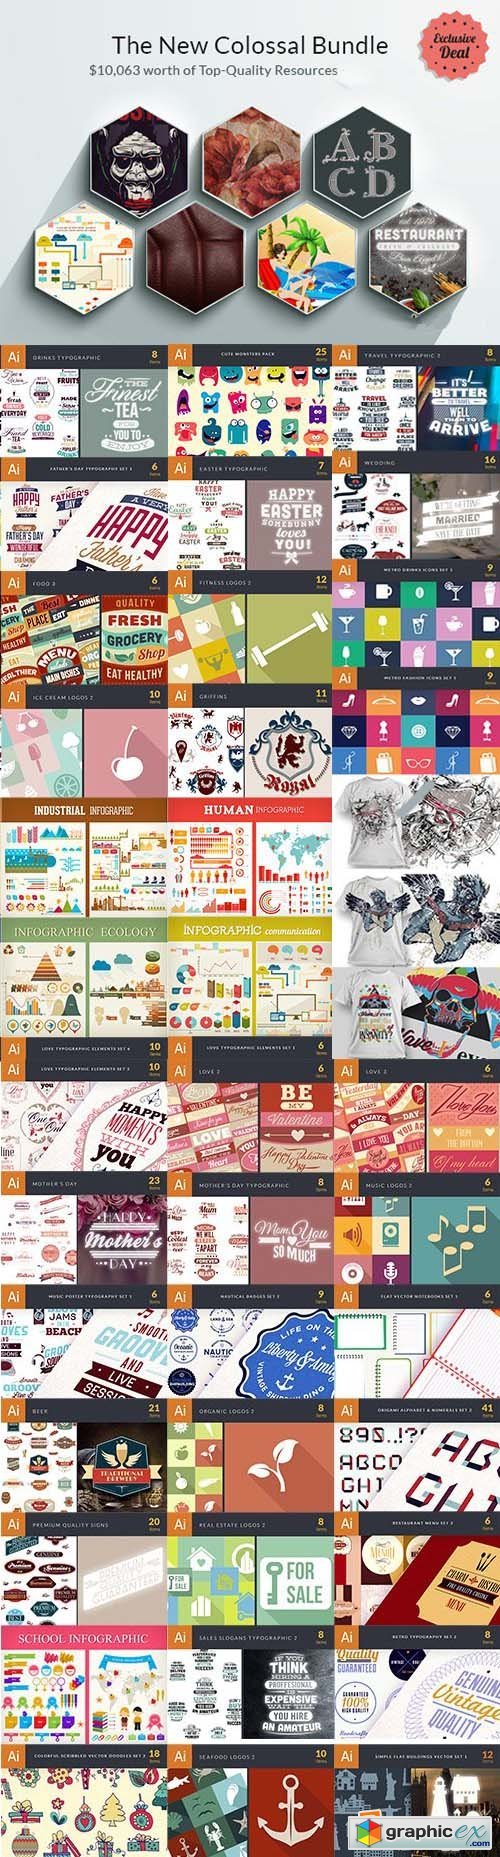 The New Colossal Bundle with $10,063 worth of Top-Quality Resources - InkyDeals